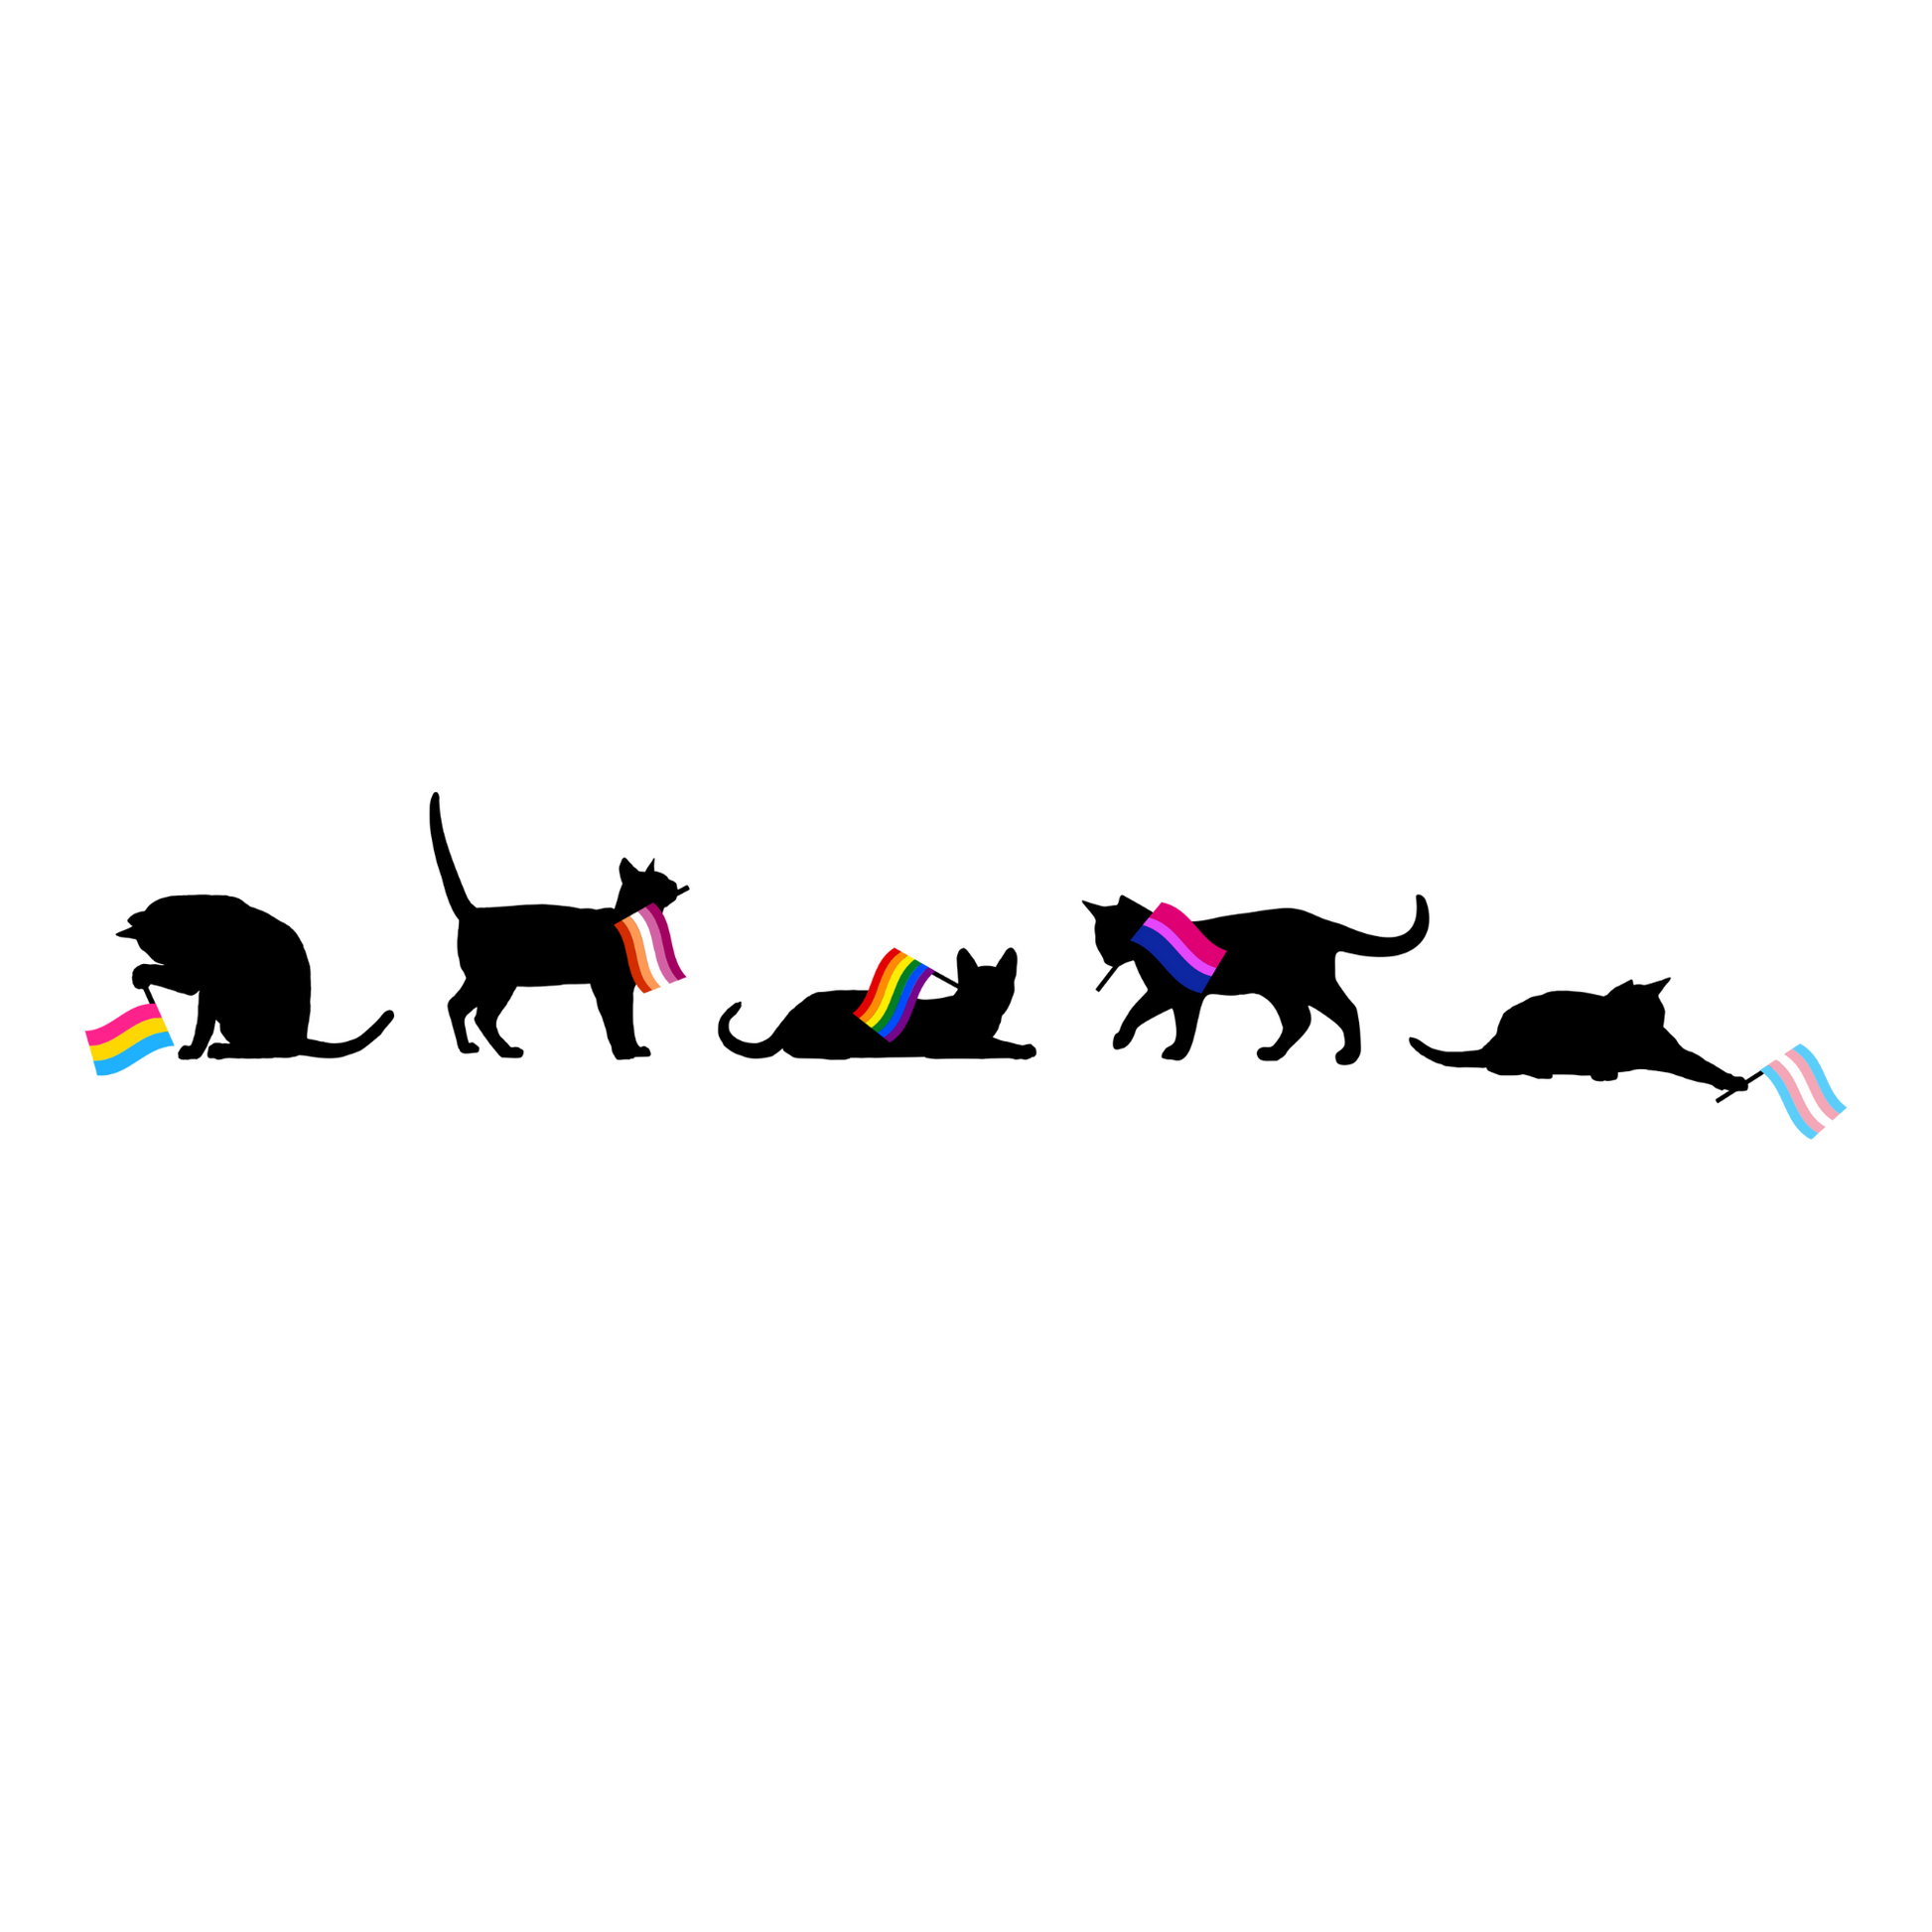 This picture has a design with five black cats in various positions with each playing with a pride flag. The first cat has a pan flag, the second a lesbian flag, the third a rainbow flag, the fourth a bi flag and the fifth a trans flag.